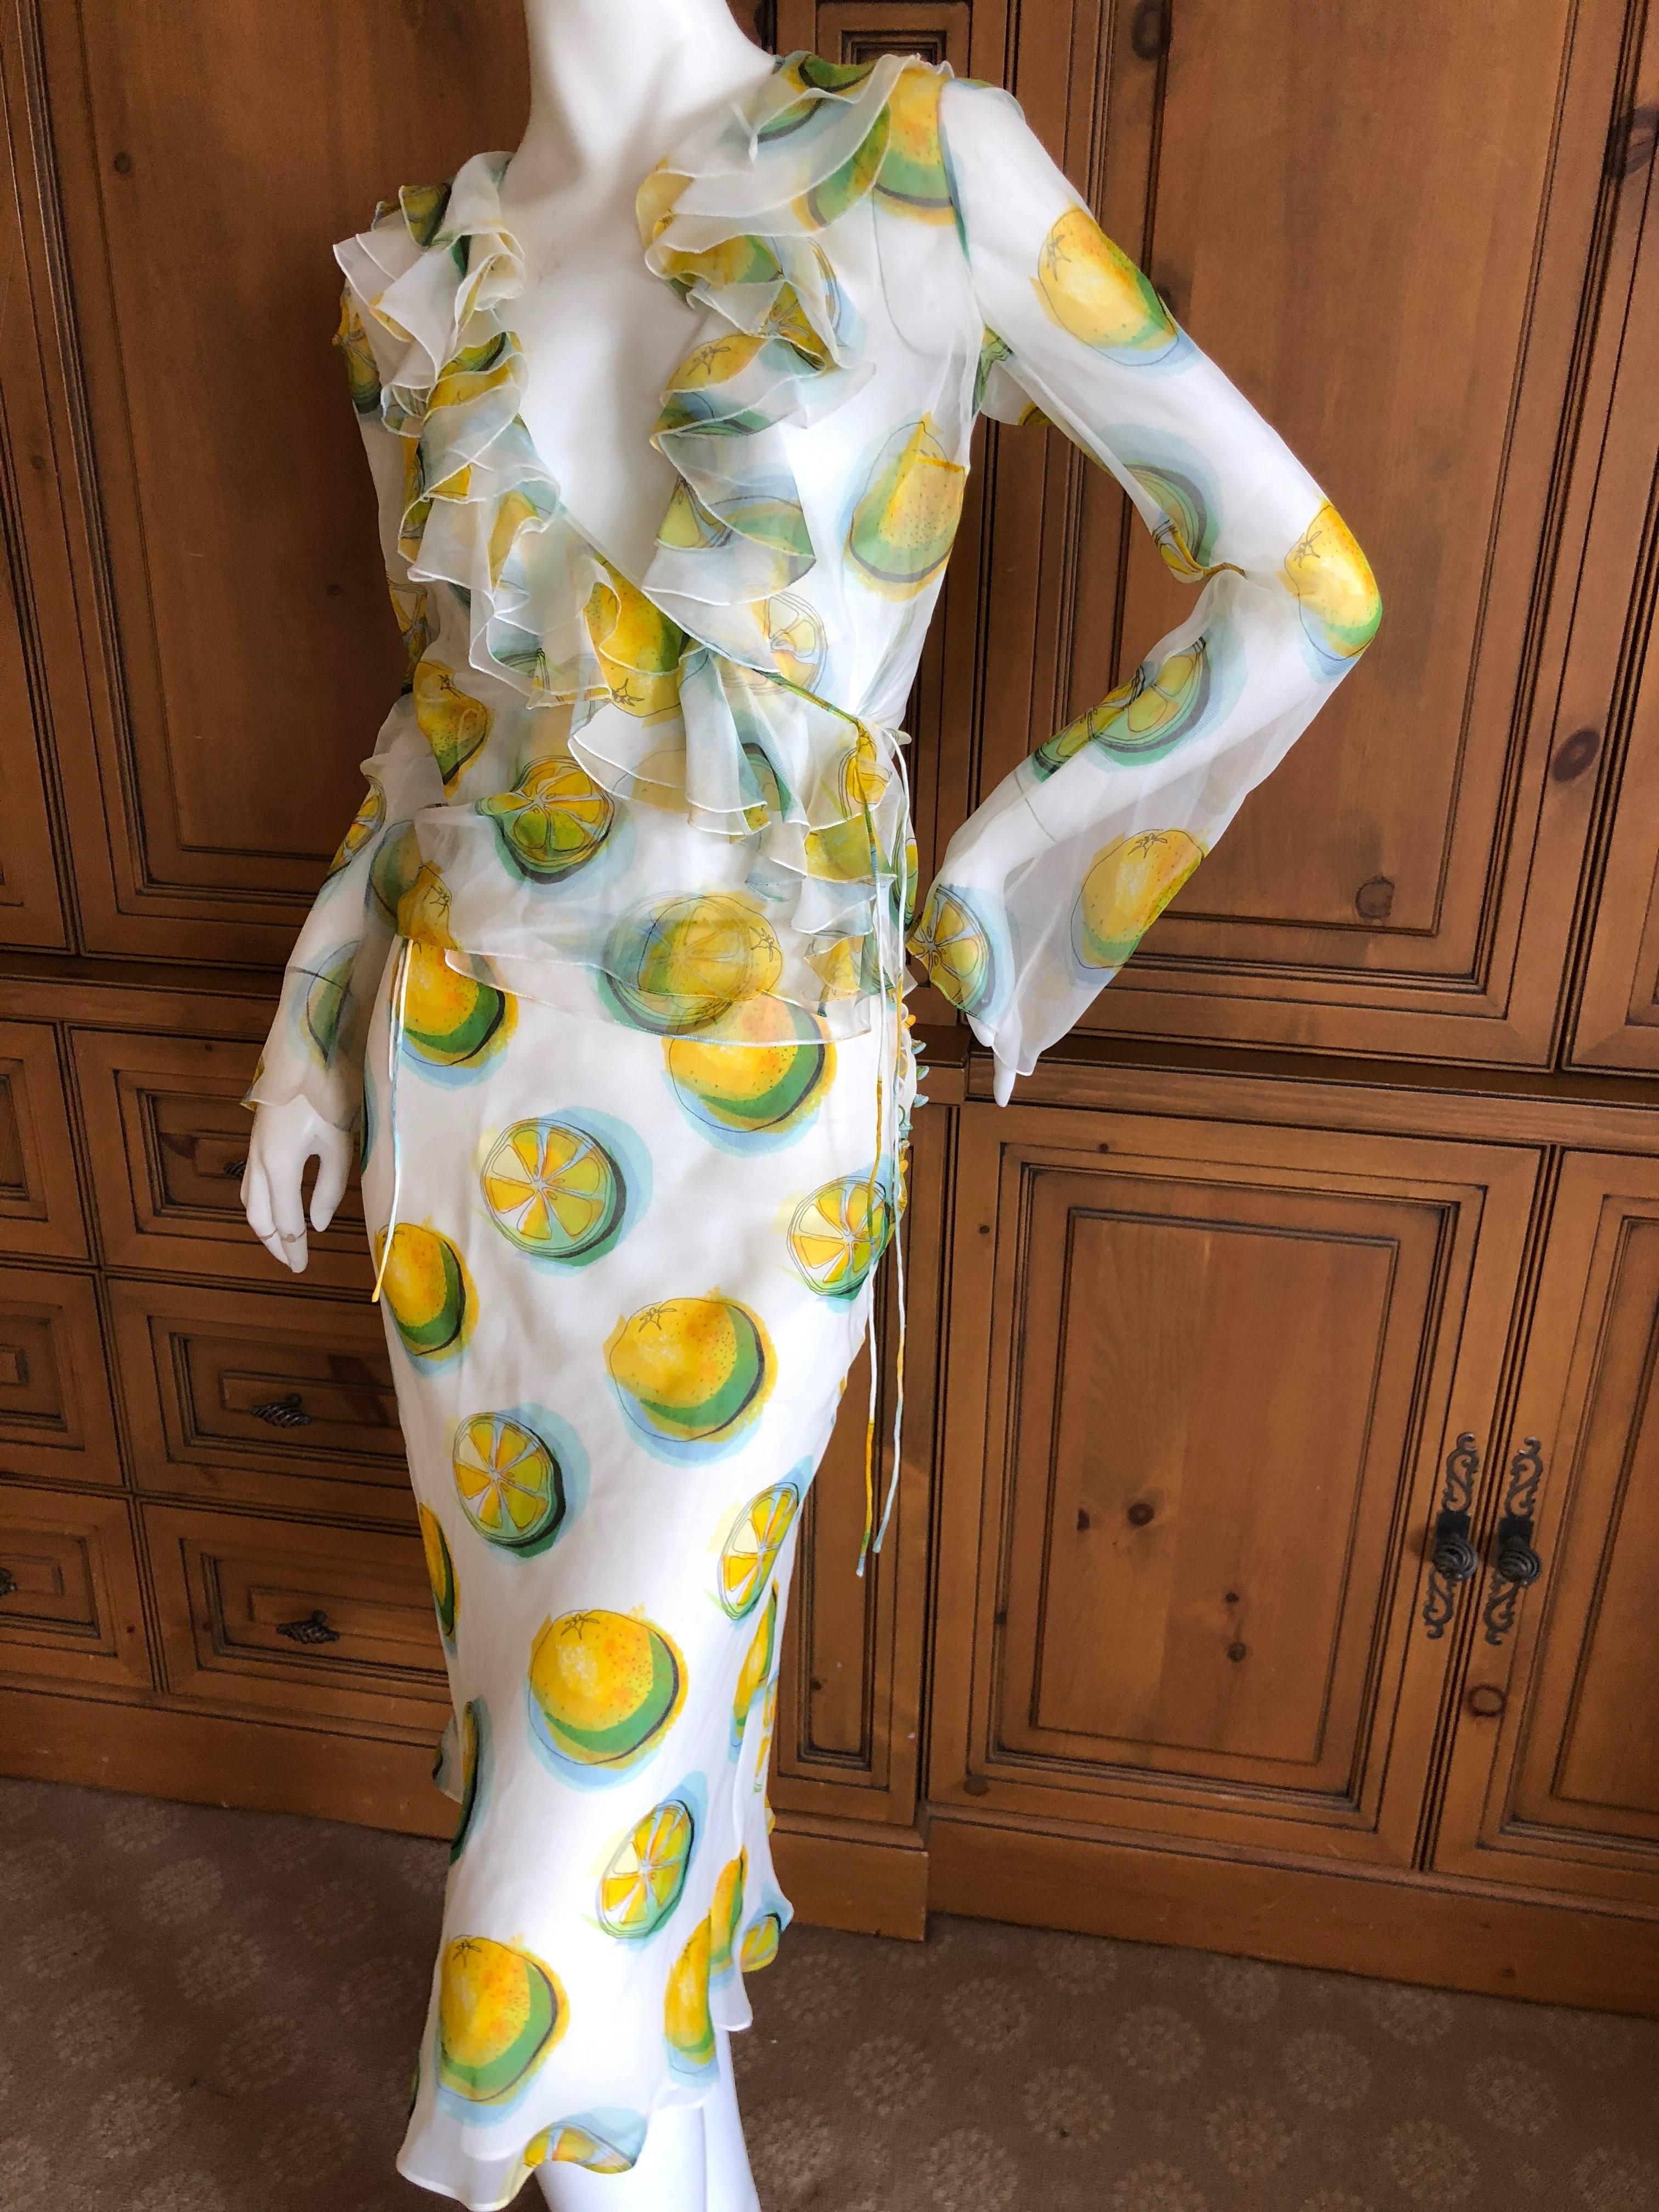 Christian Dior by John Galliano Silk Two Piece Ruffled Dress with delightful lemon print.
Featuring a sheer wrap style ruffled top and a lined pencil skirt with silk covered buttons down the side.

Size 36, top size 38 skirt
 
Bust 36